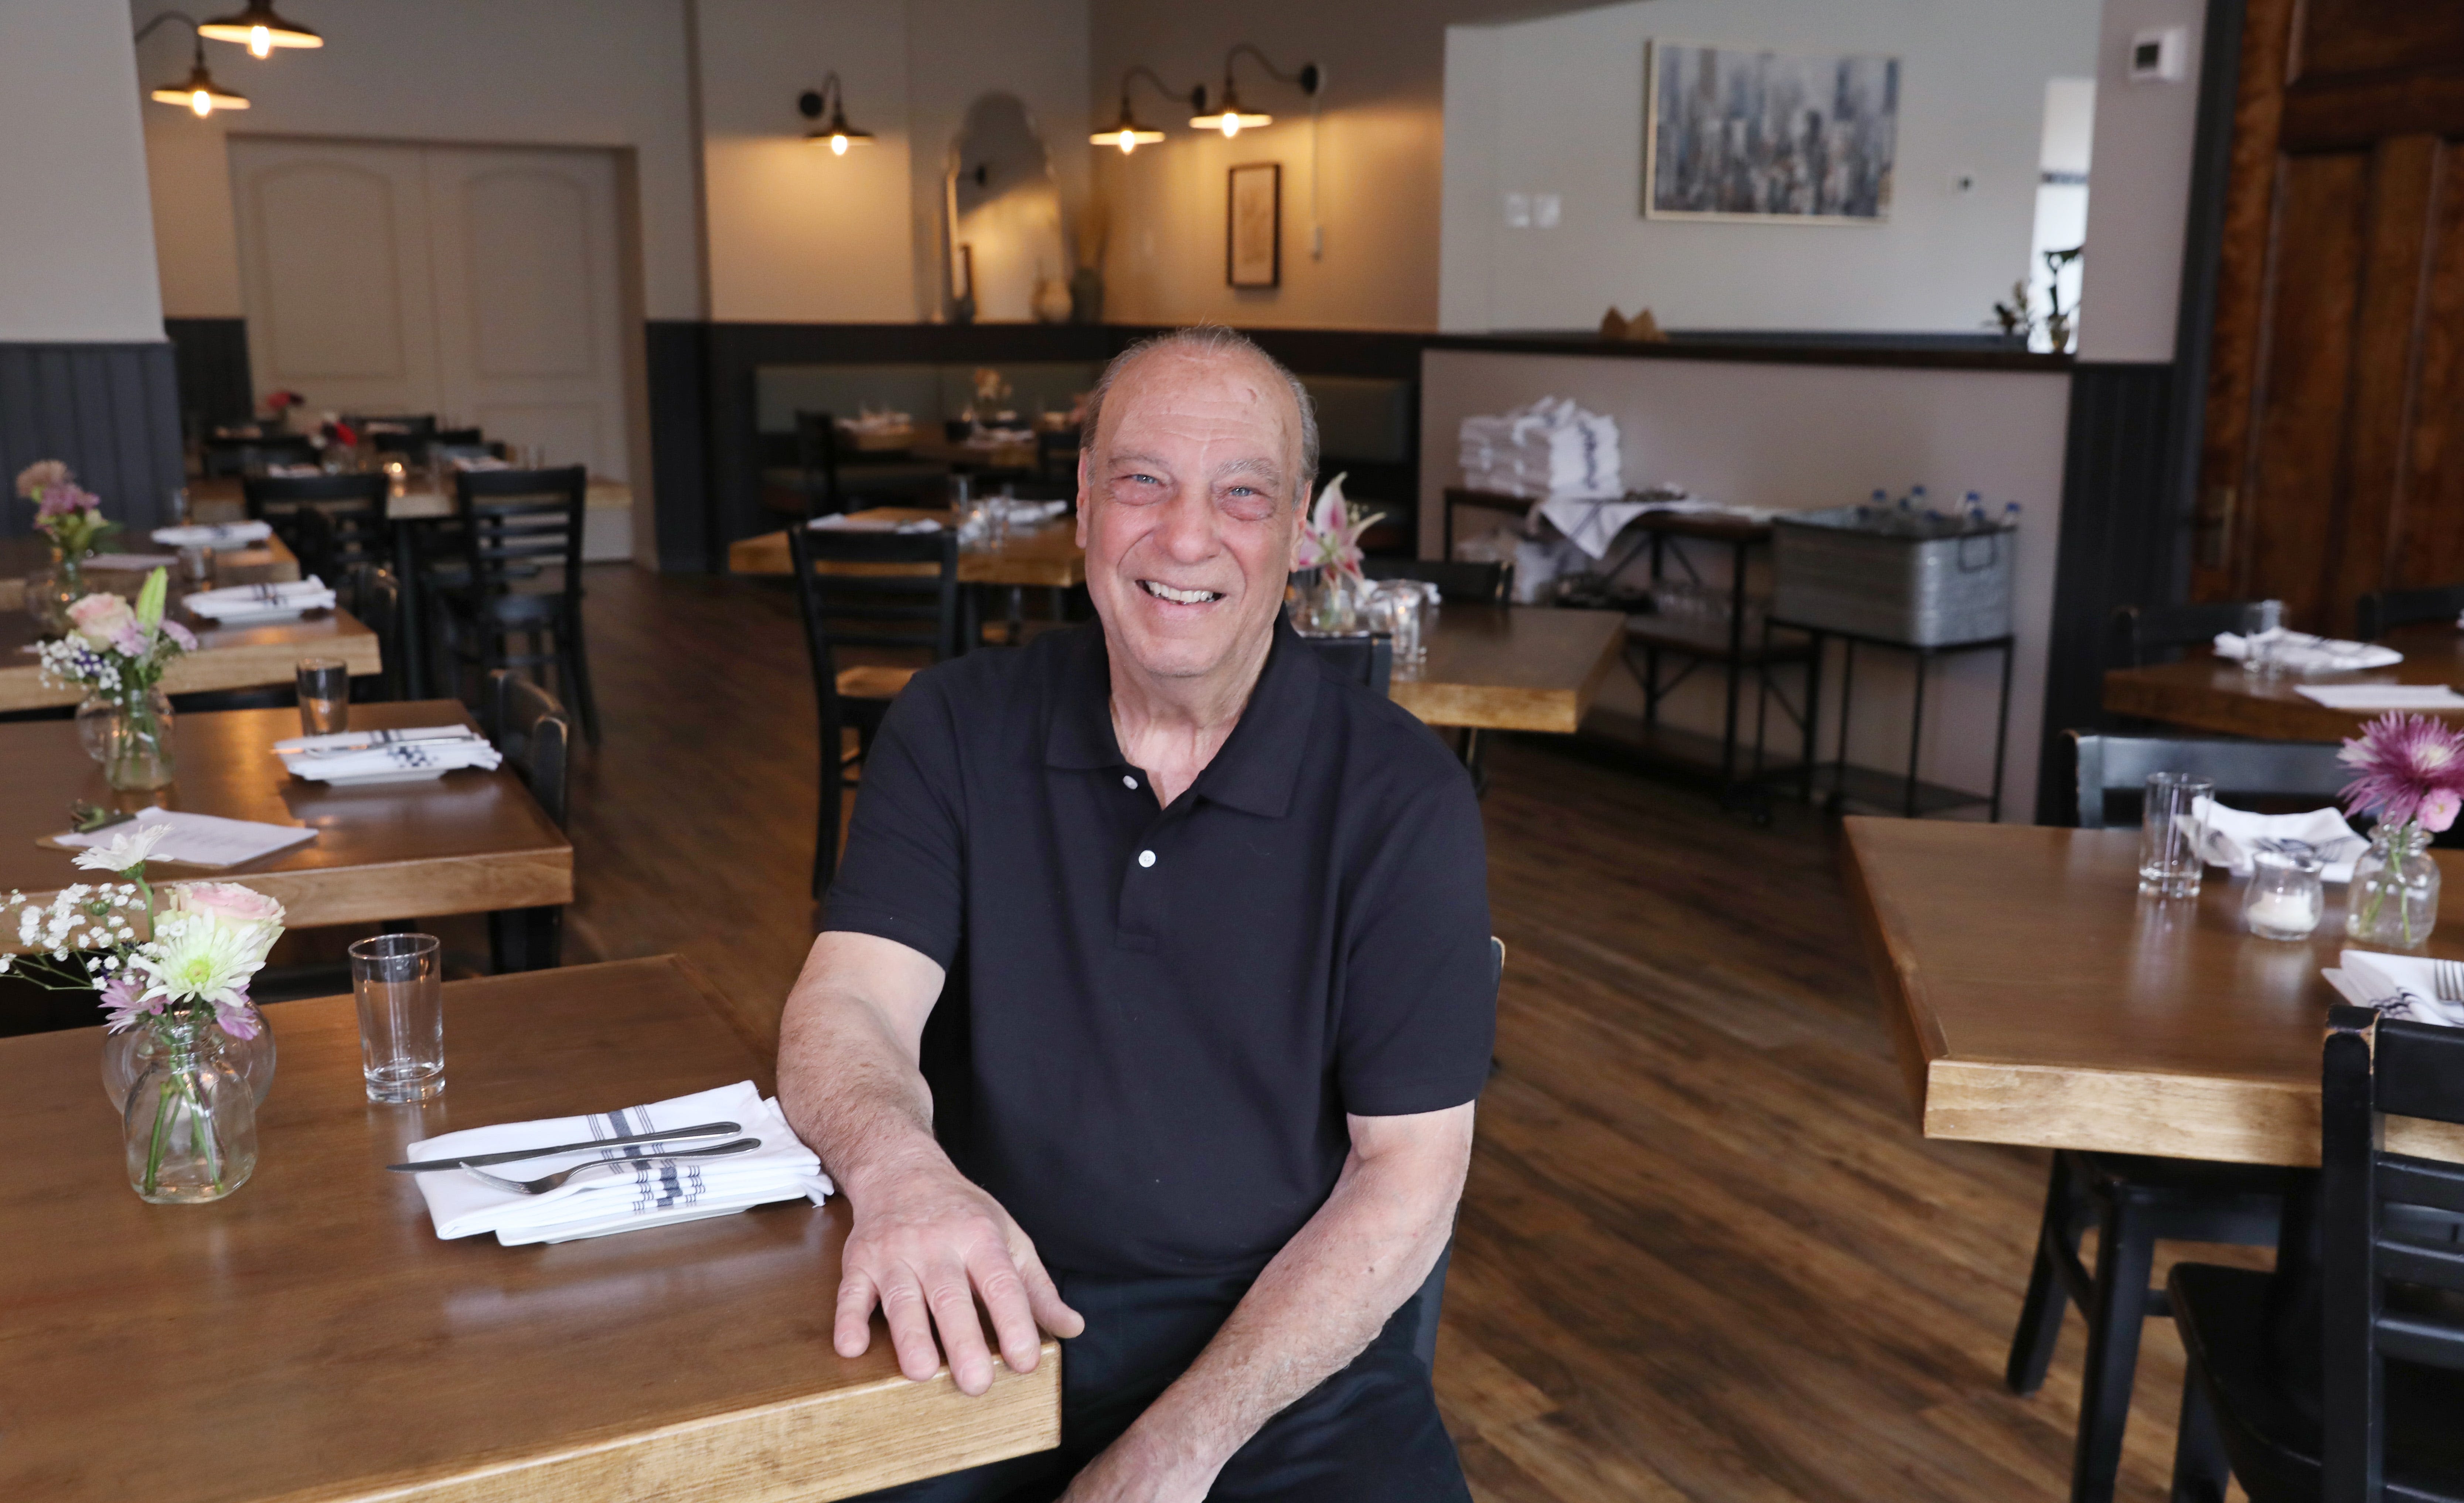 New Rochester restaurant has echoes of an old favorite. Take a peek